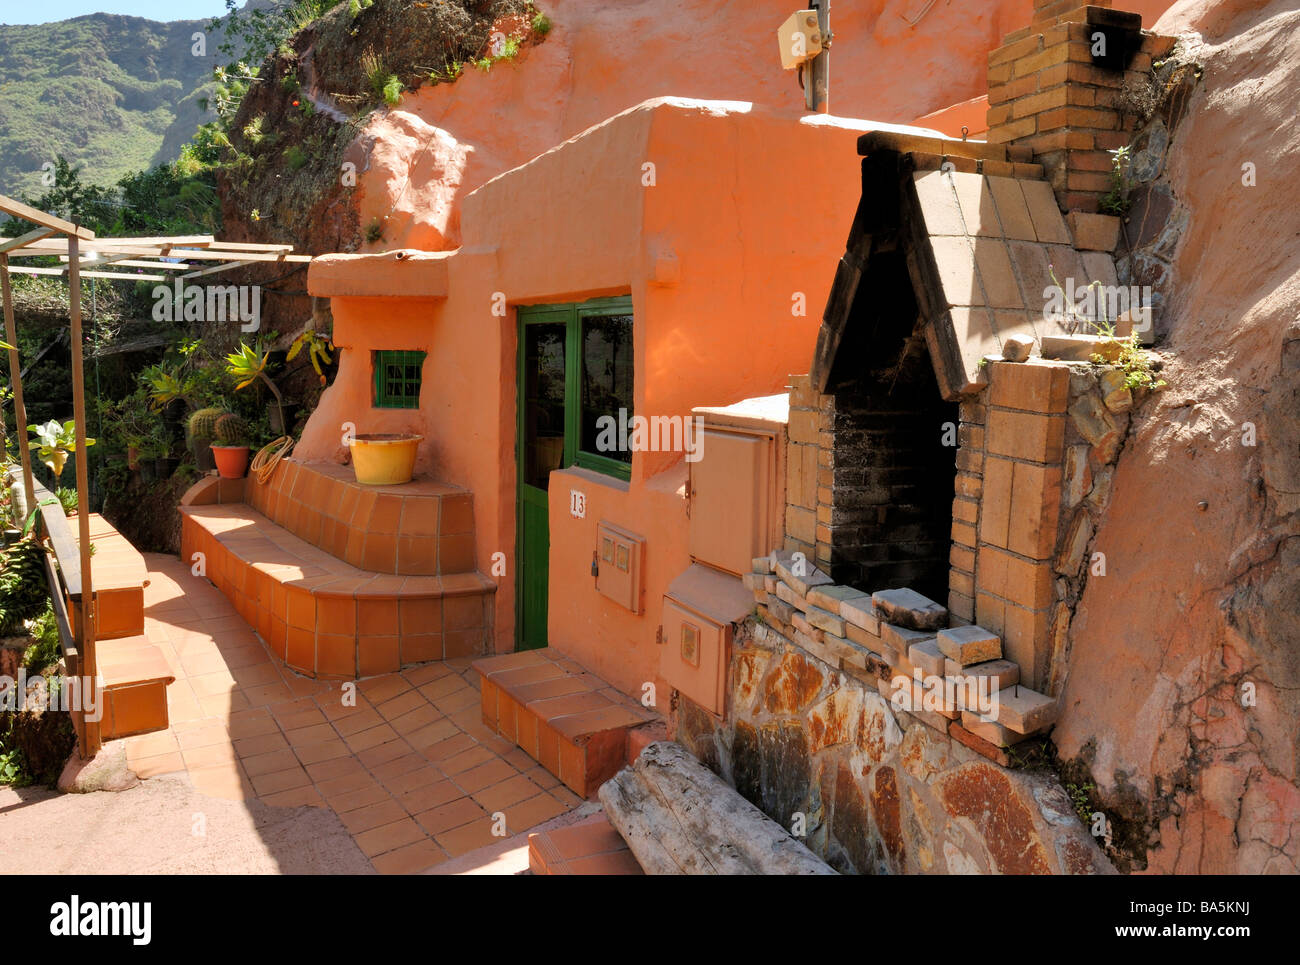 A fine view to the quirky exterior of the cave house in the Barranco de Guayadeque, Guayadeque Ravine, Cueva Bermeja, Gran Canar Stock Photo